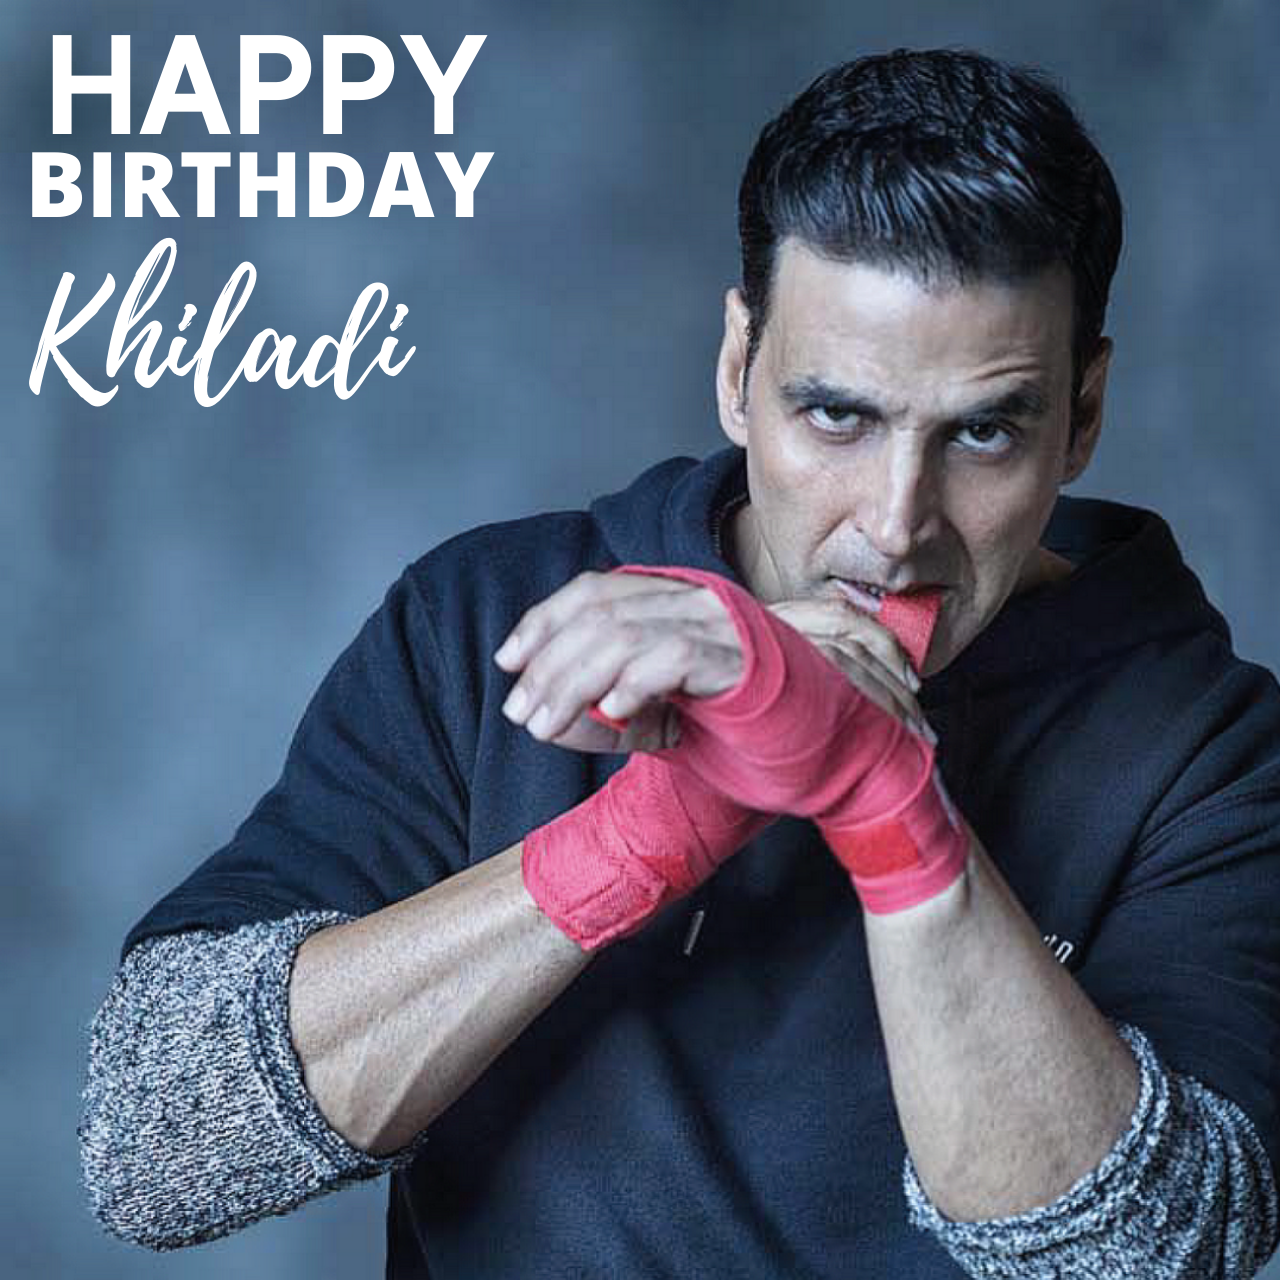 Happy Birthday Akshay Kumar Wishes, Images, Quotes, Meme, and Messages to greet Khiladi